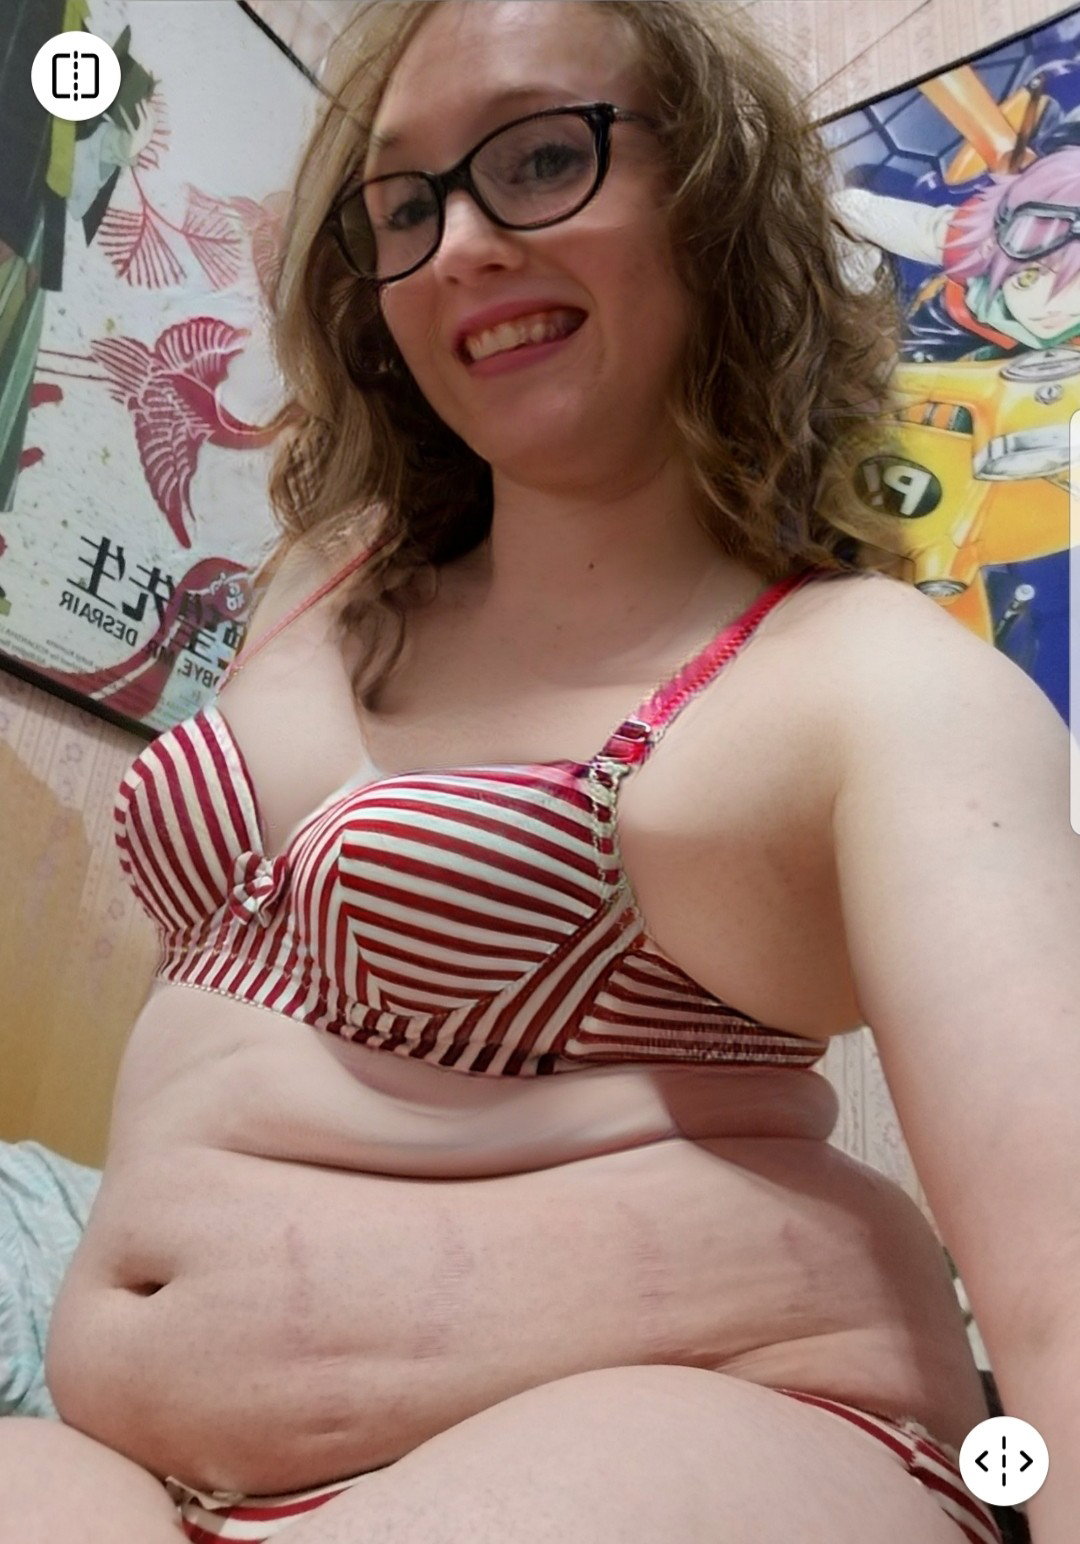 Photo by Circular Peach with the username @circularpeach, who is a star user,  August 15, 2020 at 9:43 AM. The post is about the topic Curvy